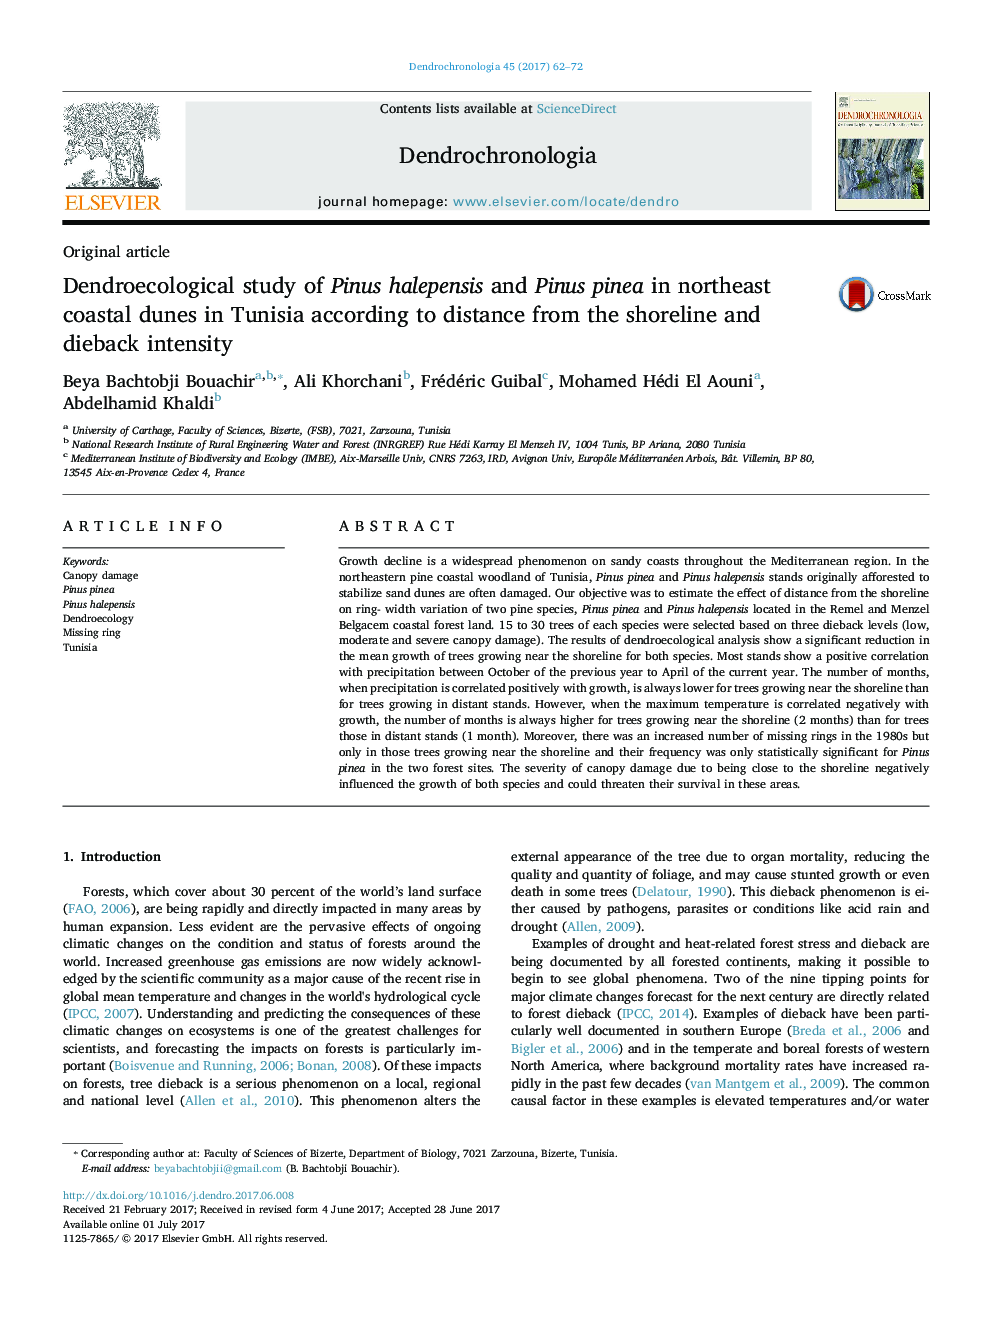 Dendroecological study of Pinus halepensis and Pinus pinea in northeast coastal dunes in Tunisia according to distance from the shoreline and dieback intensity